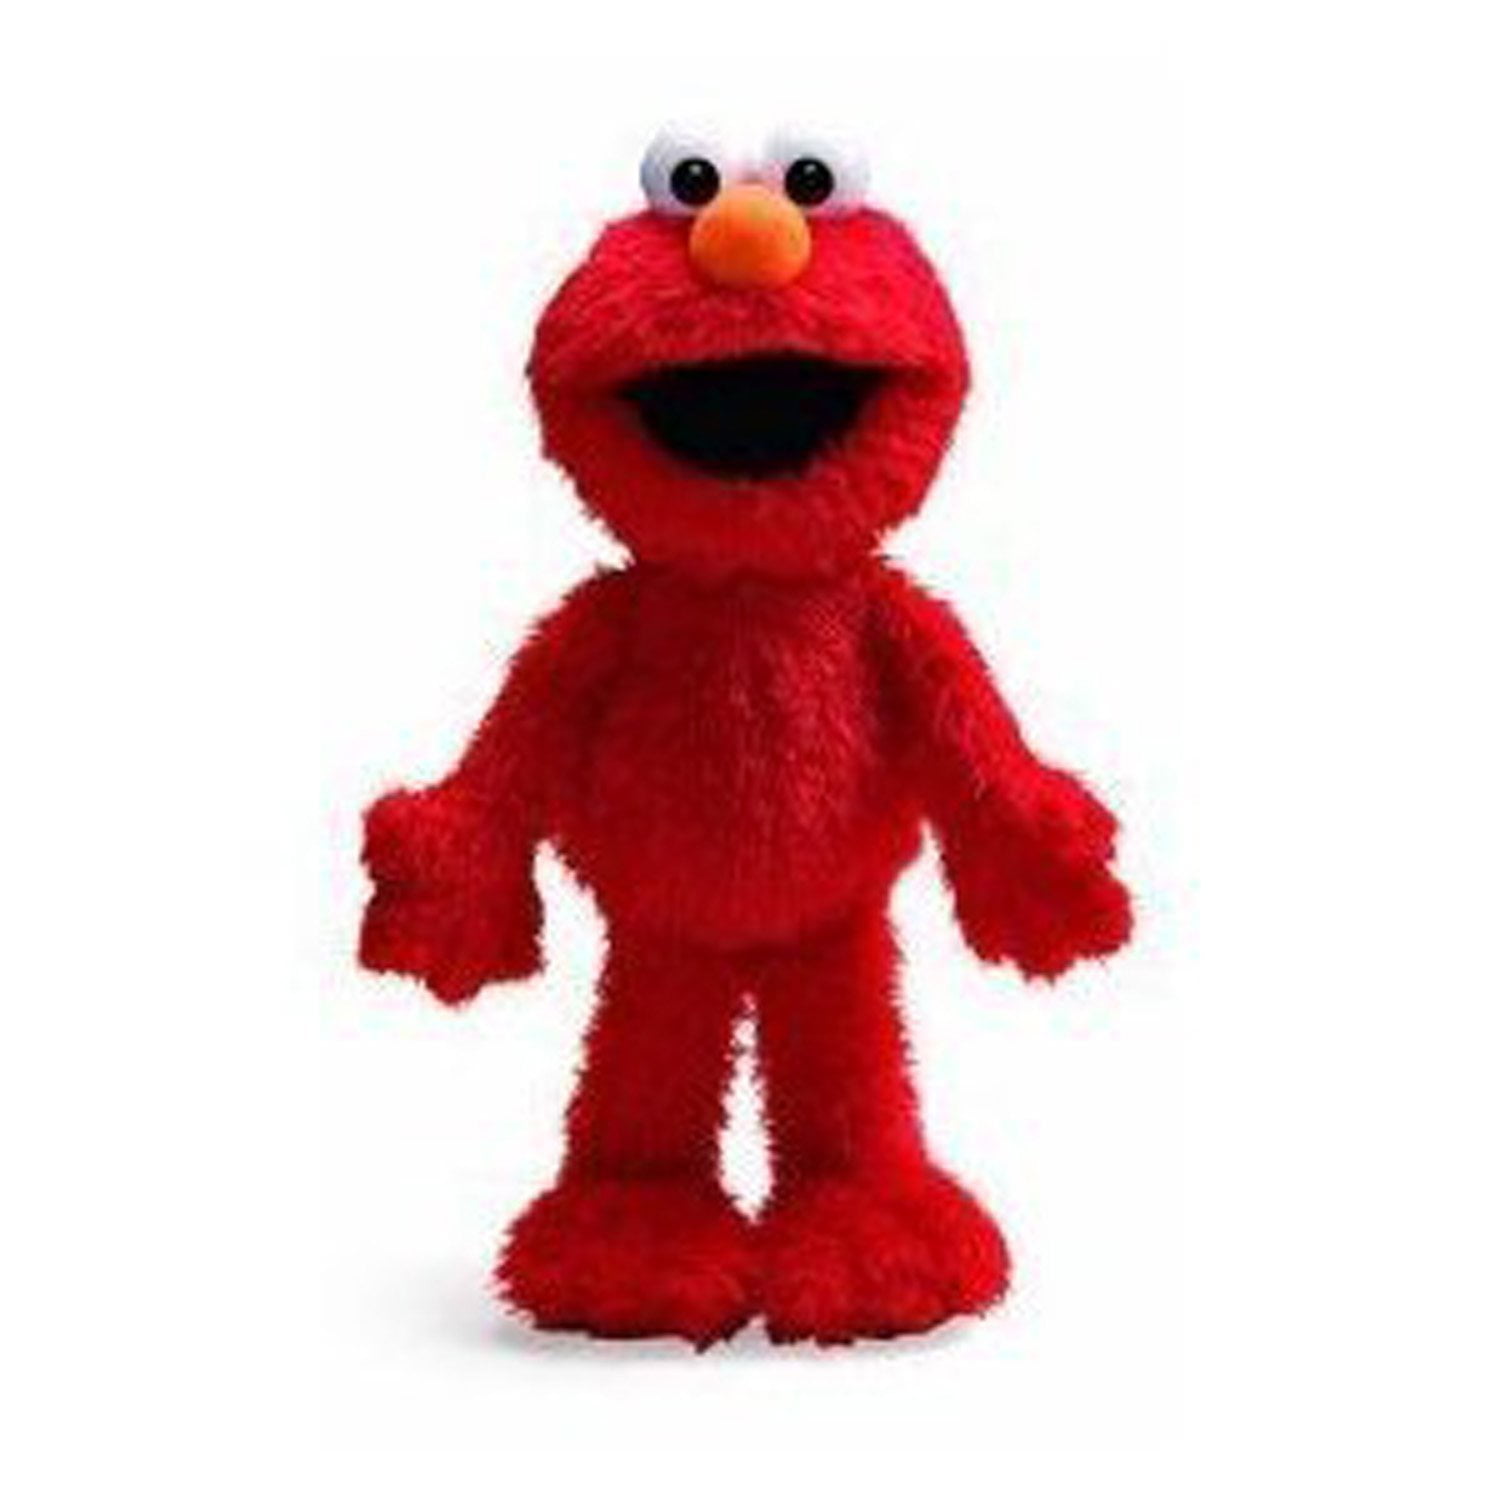 Red for sale online Hasbro C0923 Tickle Me Elmo Plush Toy 